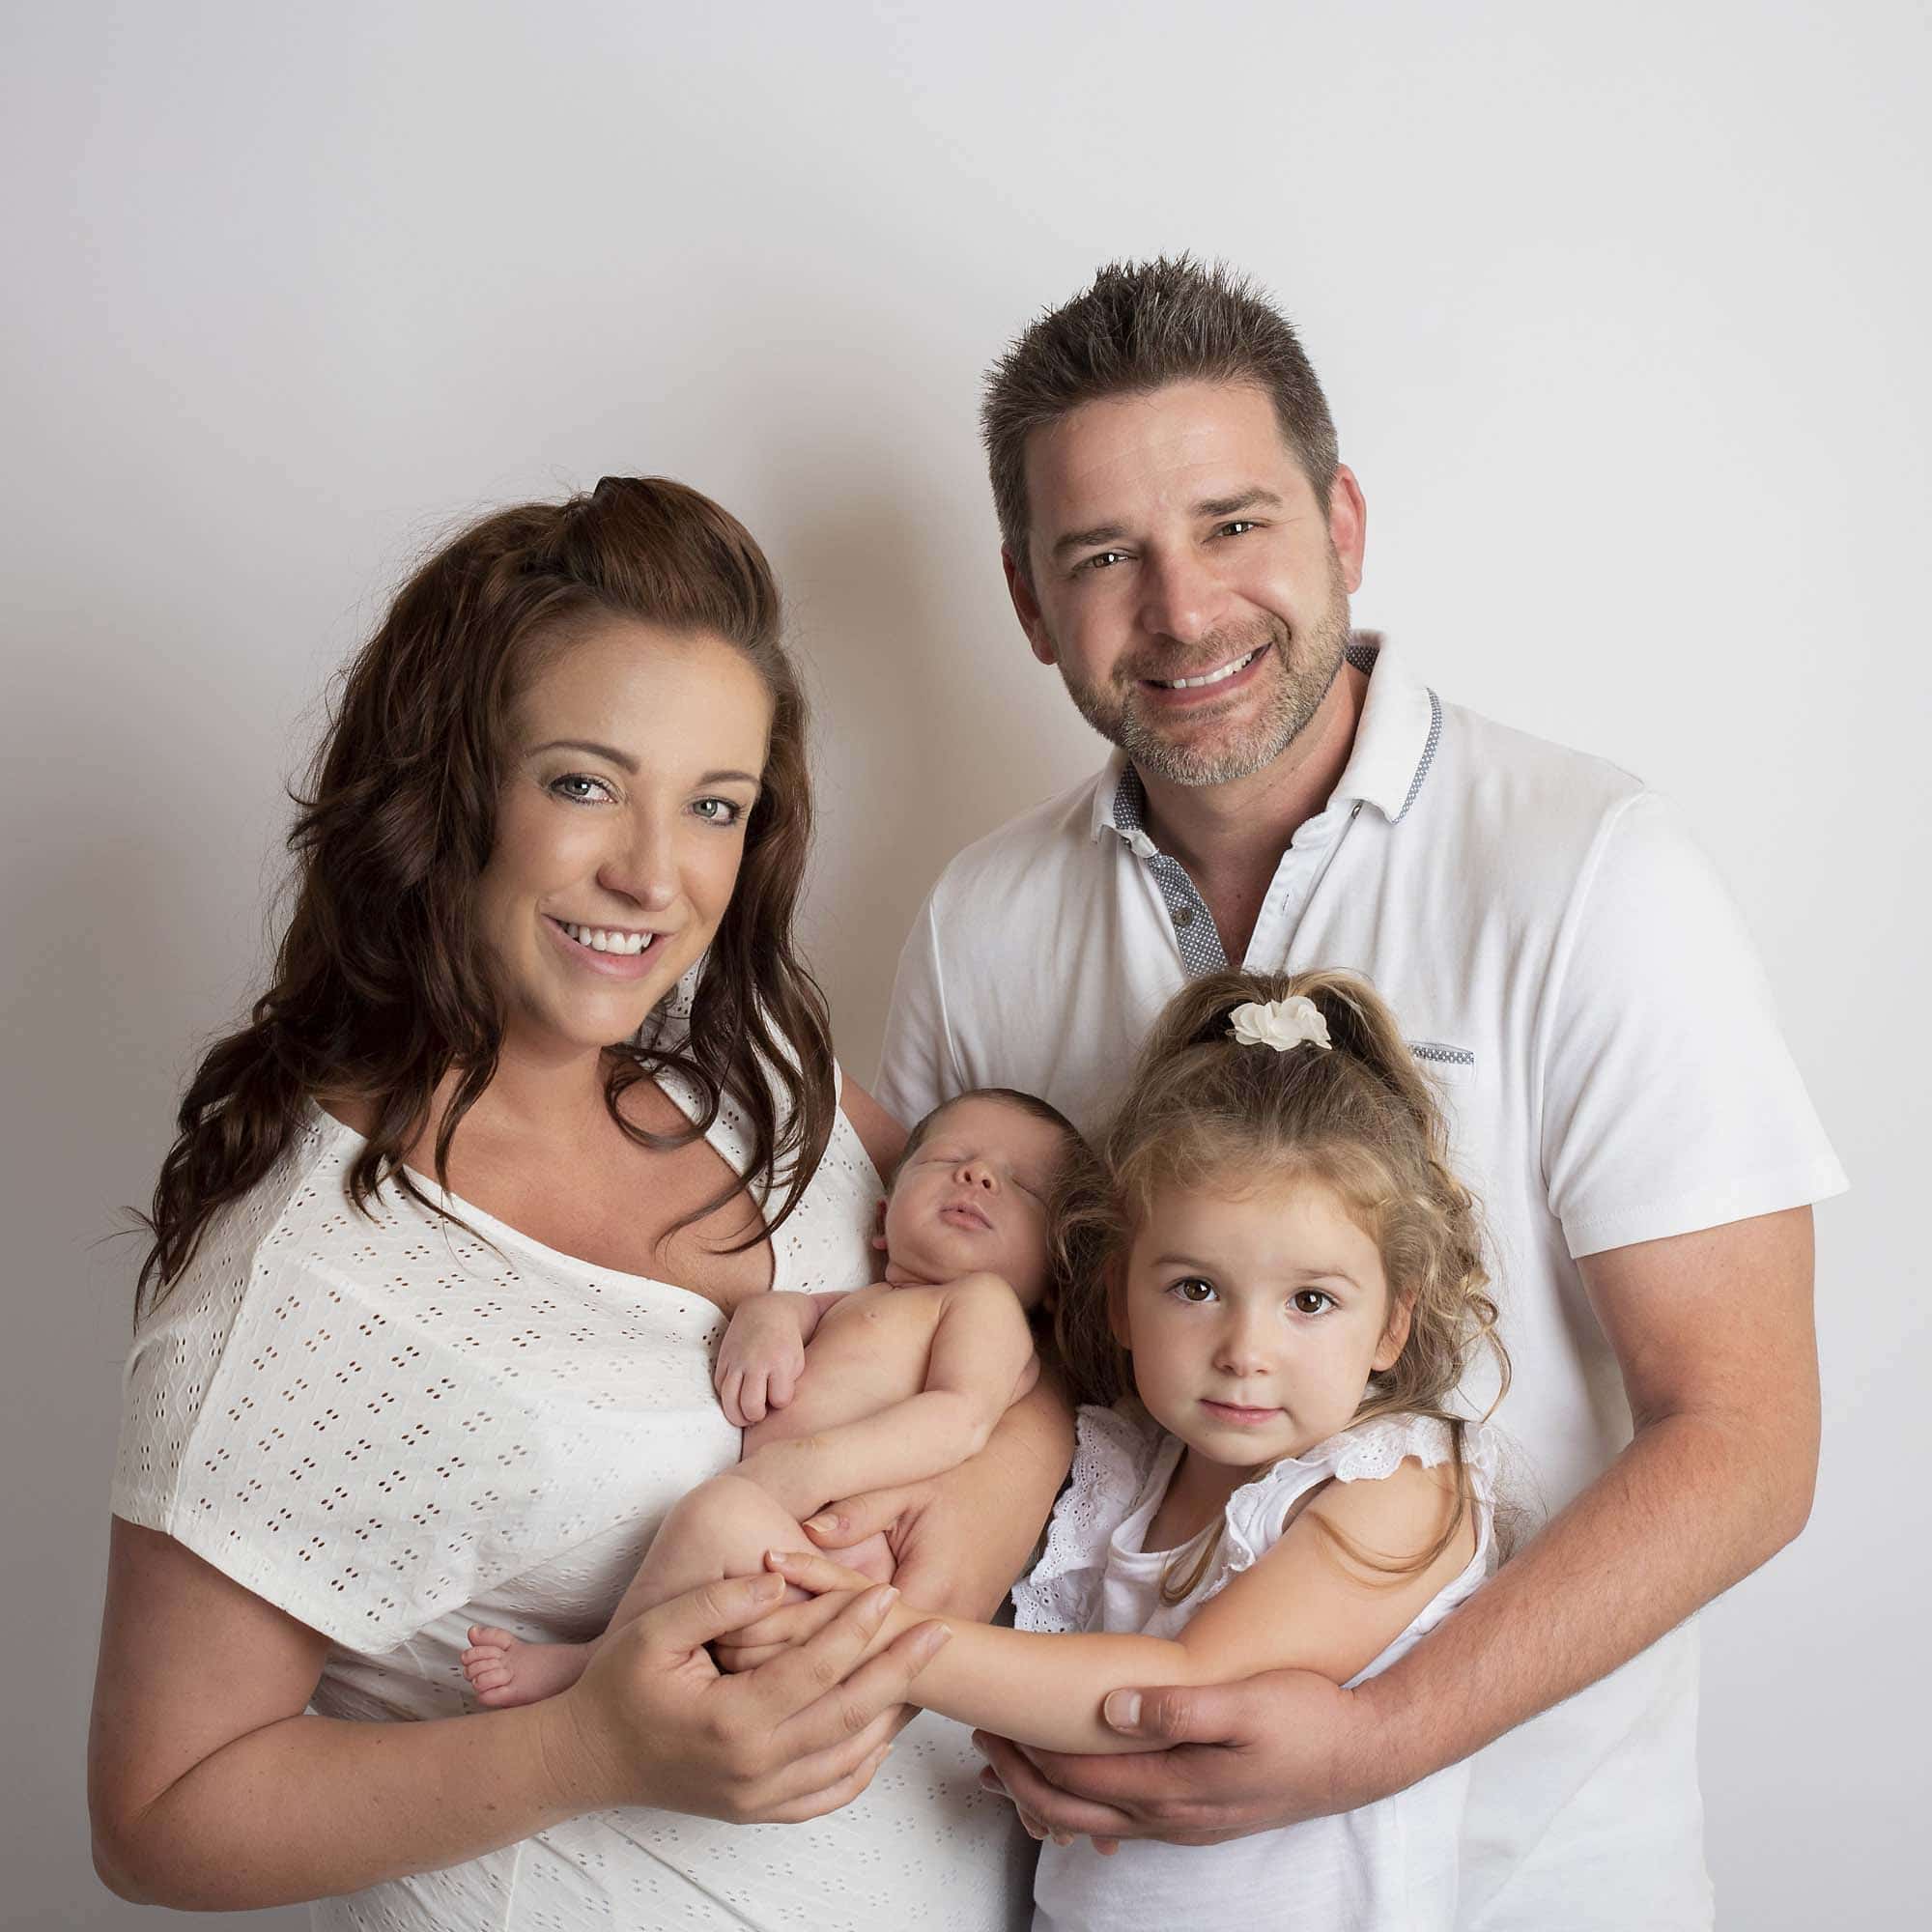 family portrait photographed by Baby Photographer Manchester